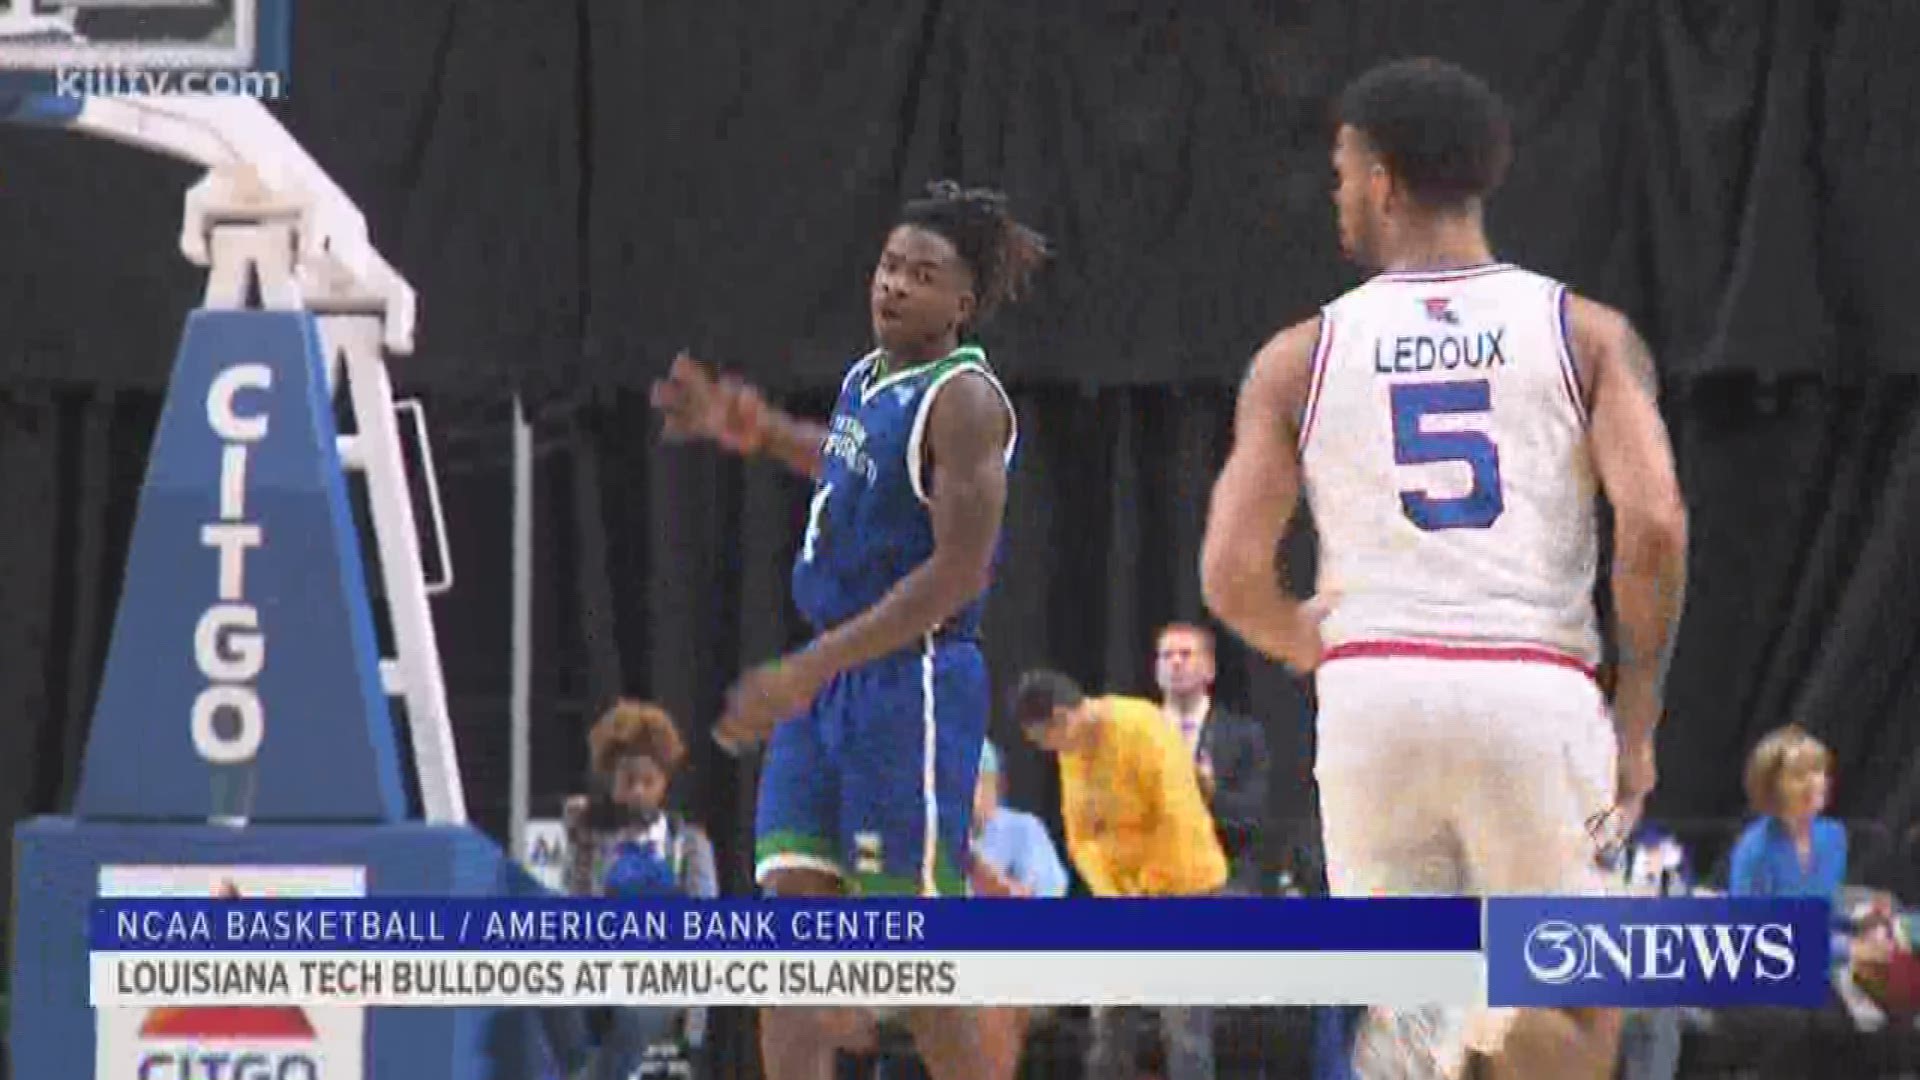 Texas A&M-Corpus Christi hung with the Bulldogs early before LA Tech eventually pulled away 82-49.